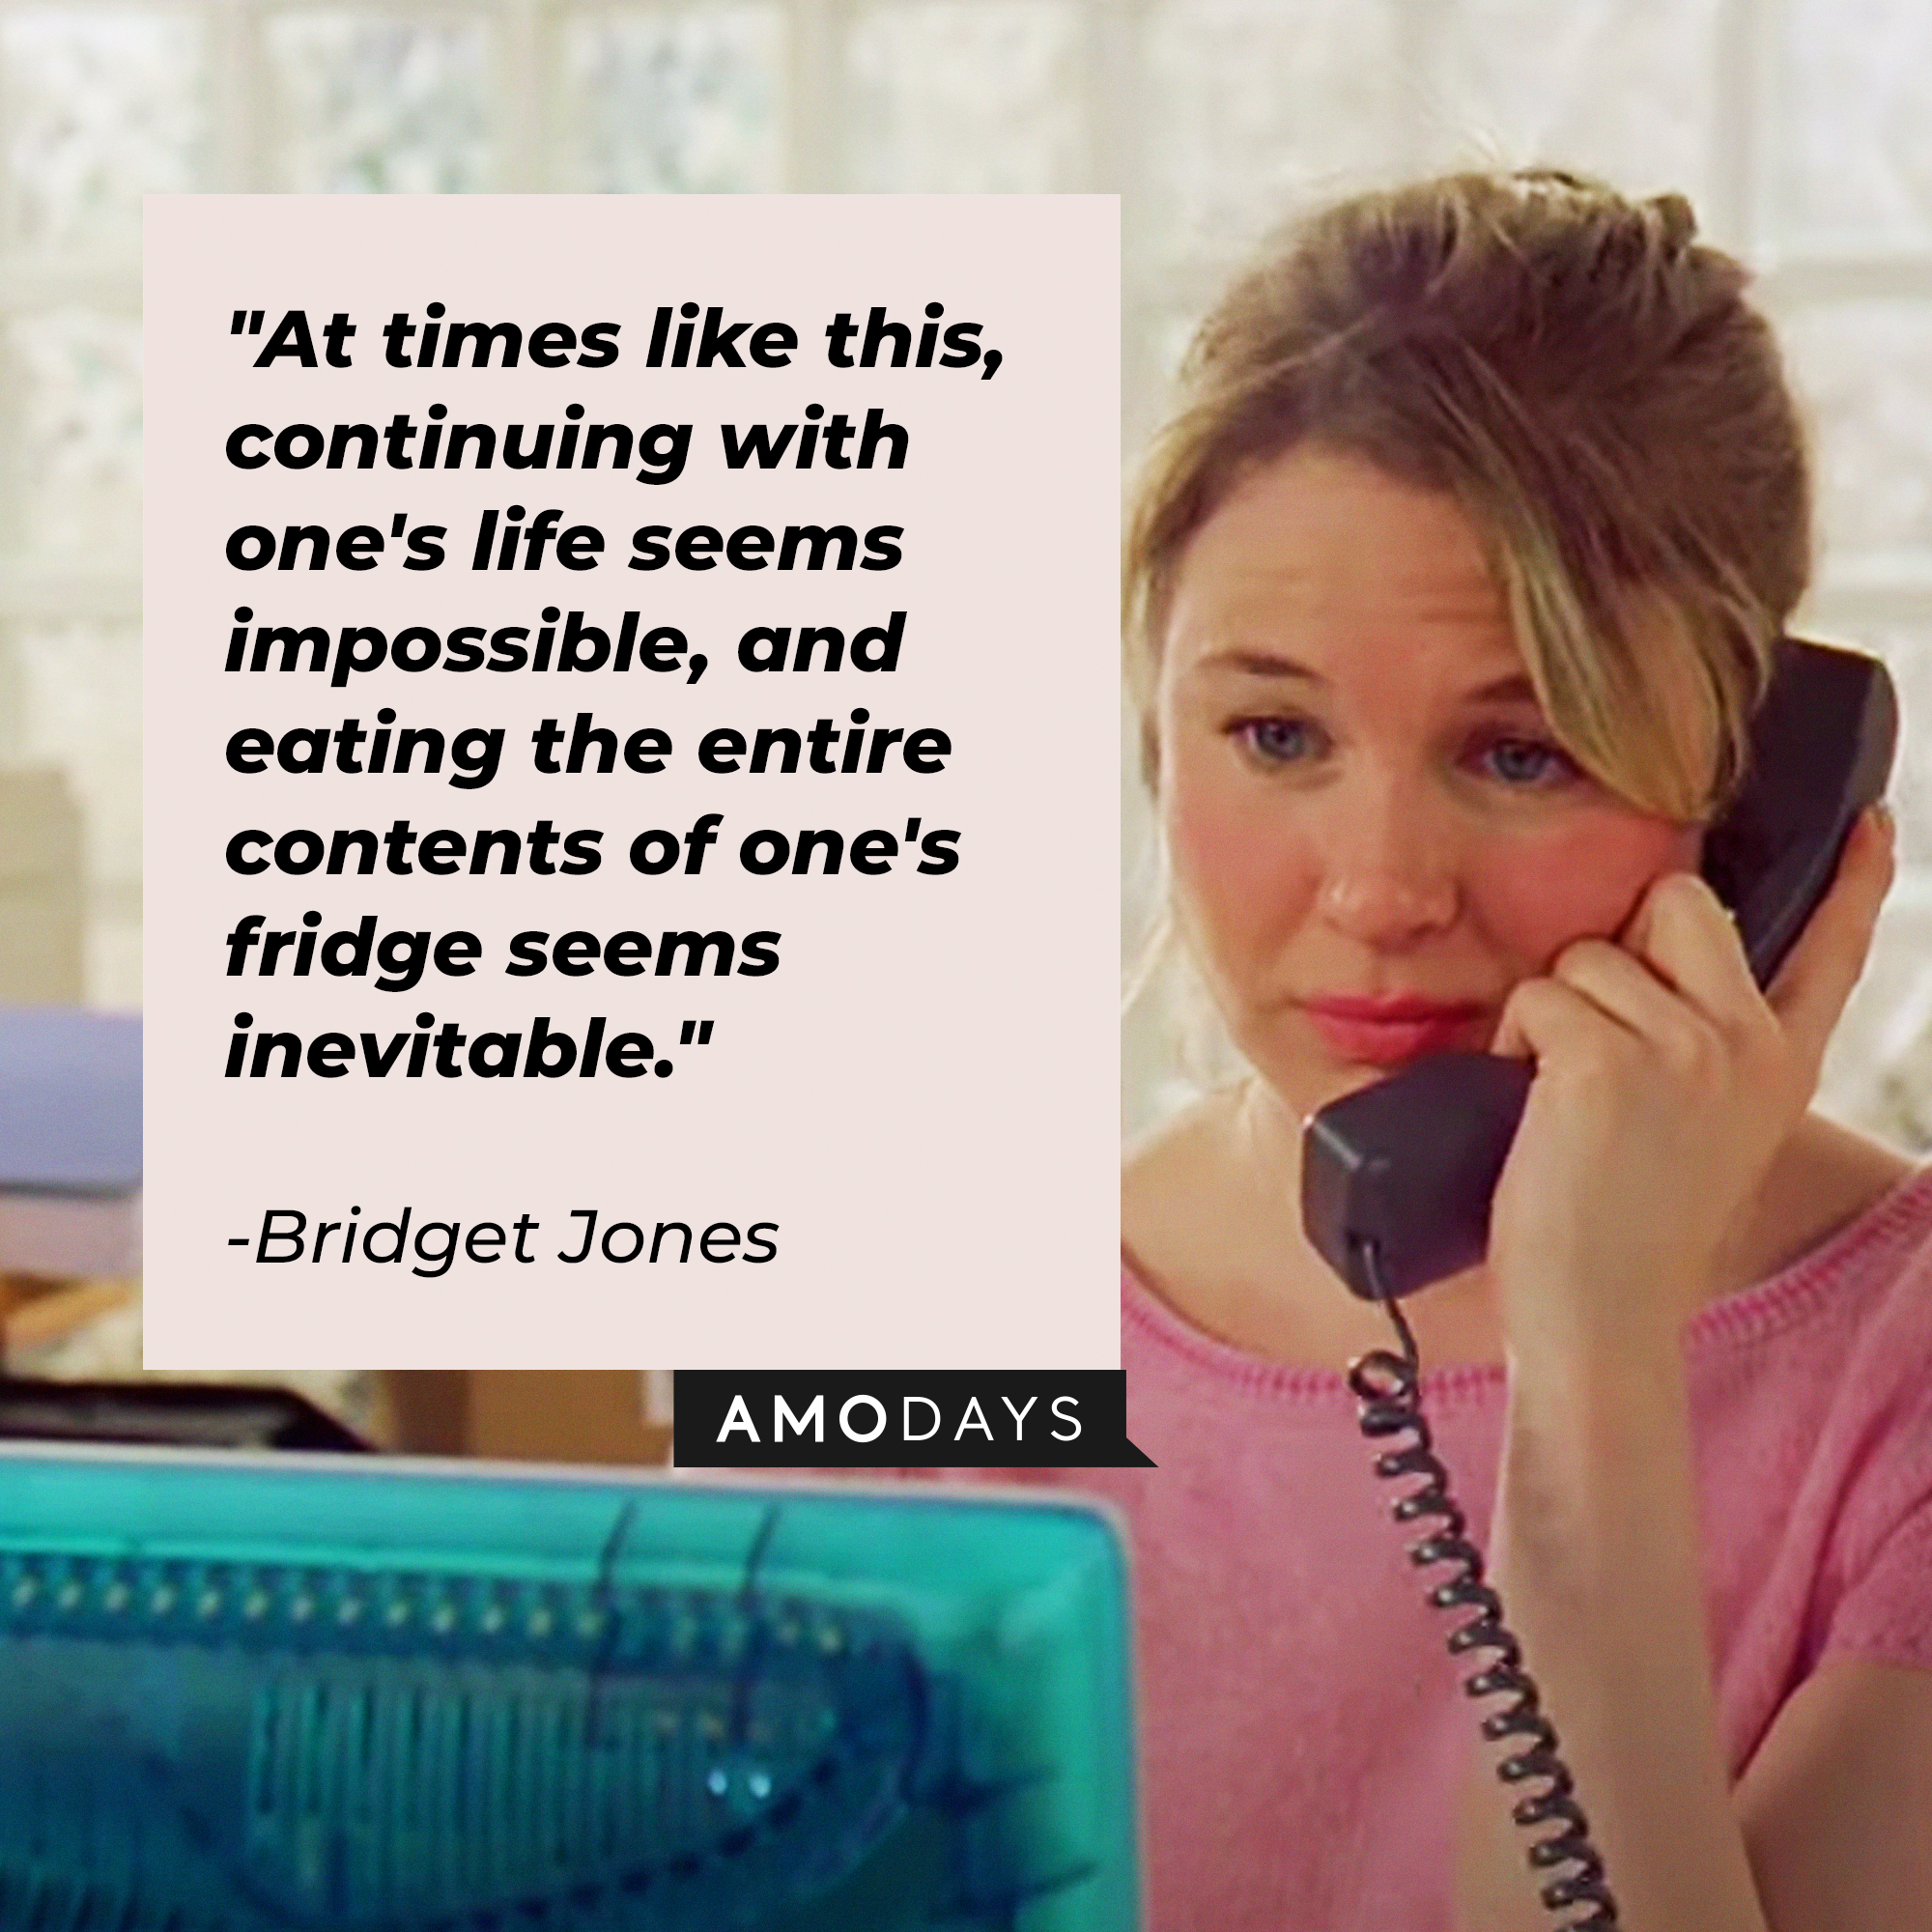 Bridget Jones with her quote in "Bridget Jones's Diary:" "At times like this, continuing with one's life seems impossible, and eating the entire contents of one's fridge seems inevitable." | Source: Facebook/BridgetJonessDiary